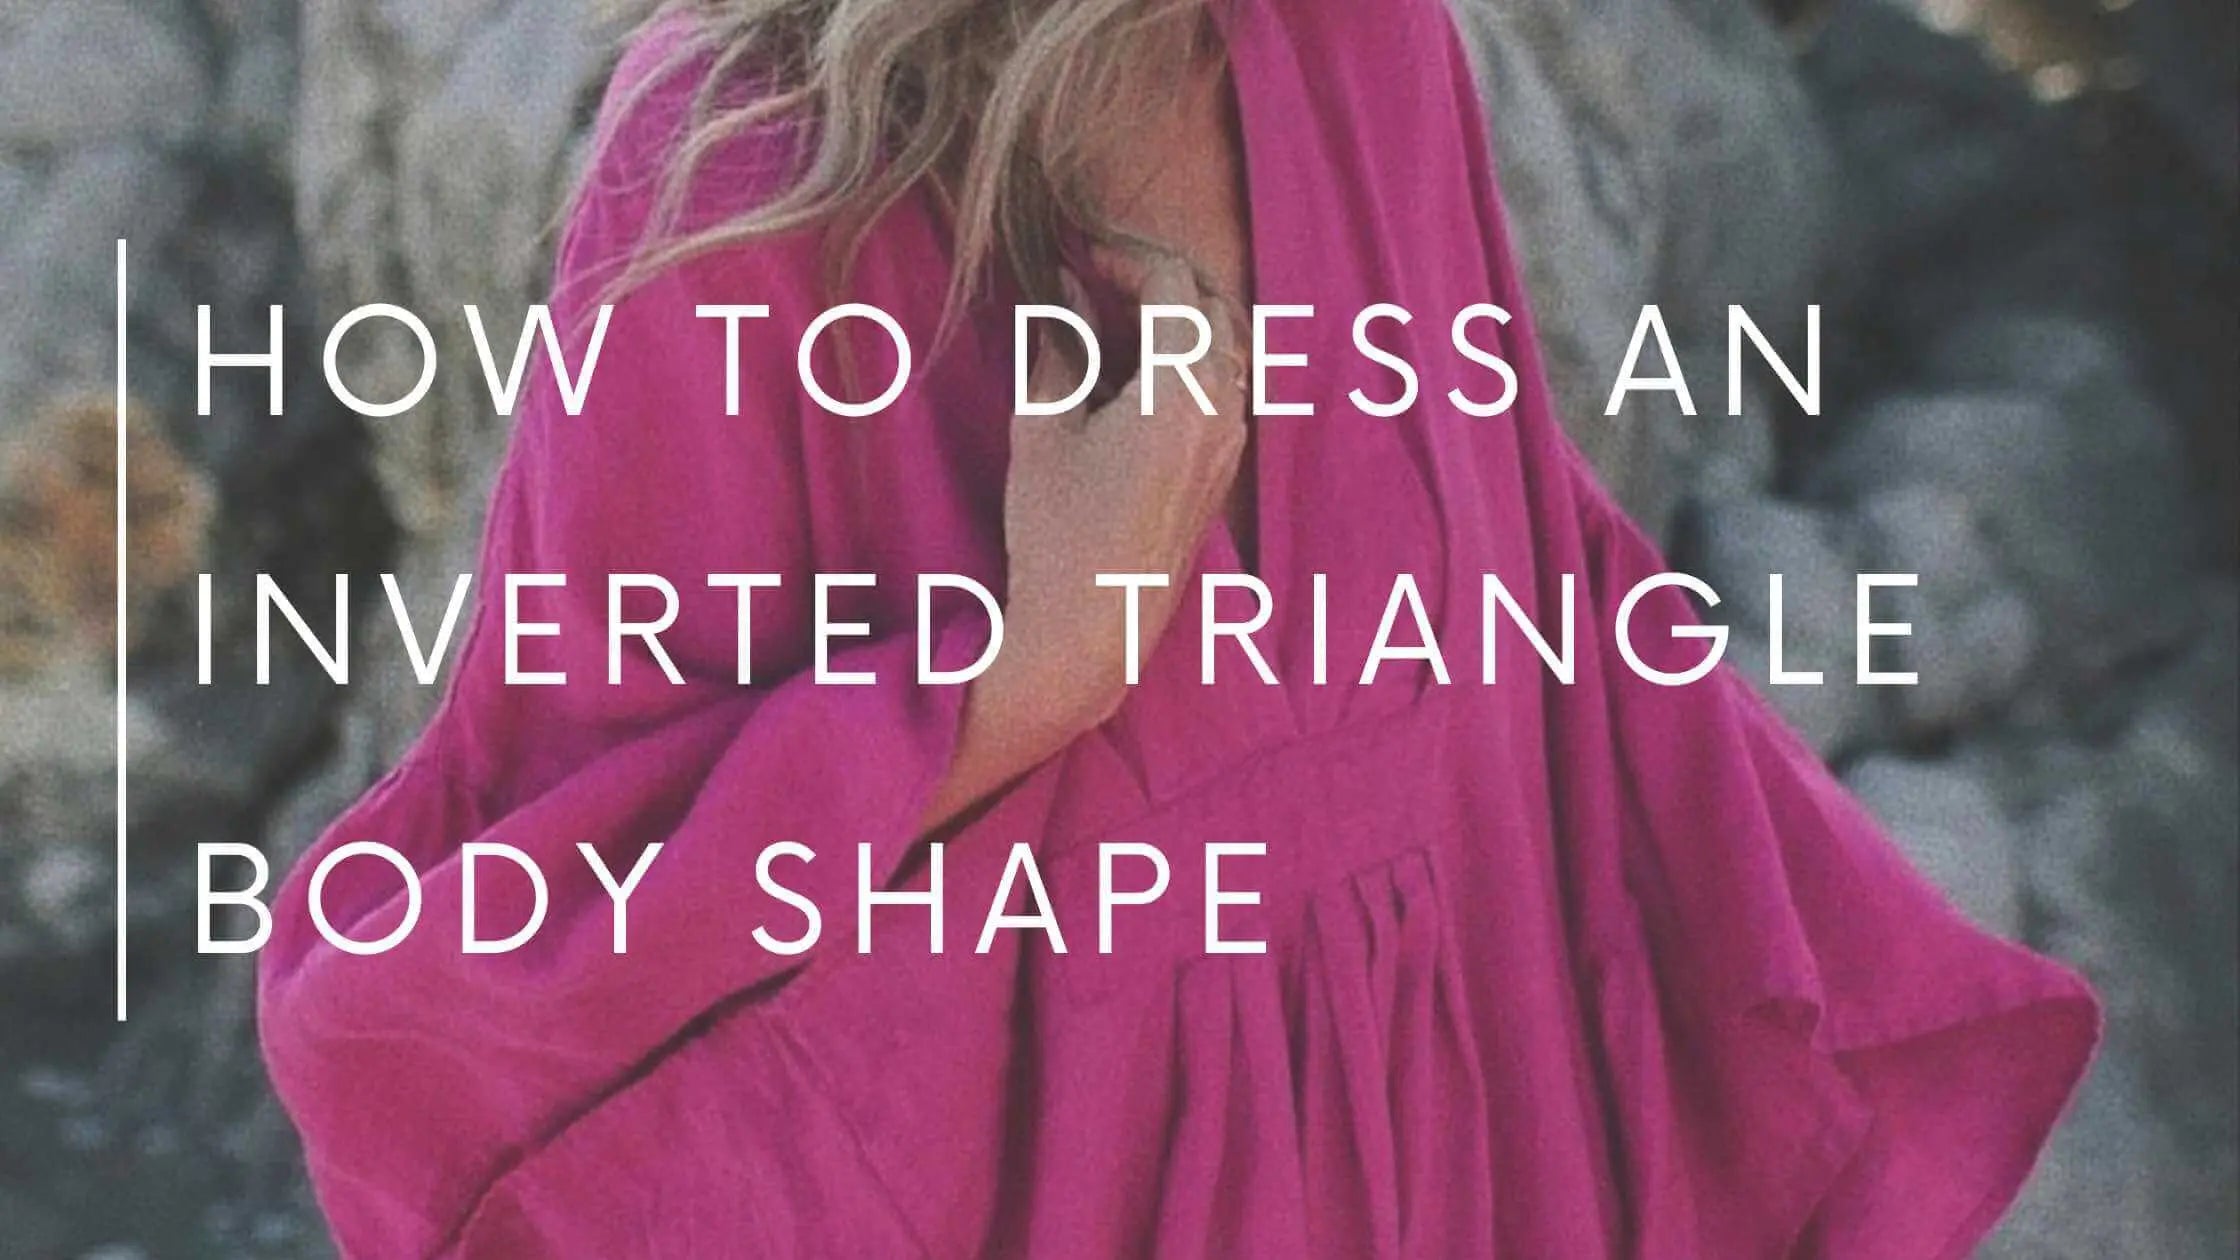 Inverted Triangle Body Shape - Outfit Suggestions